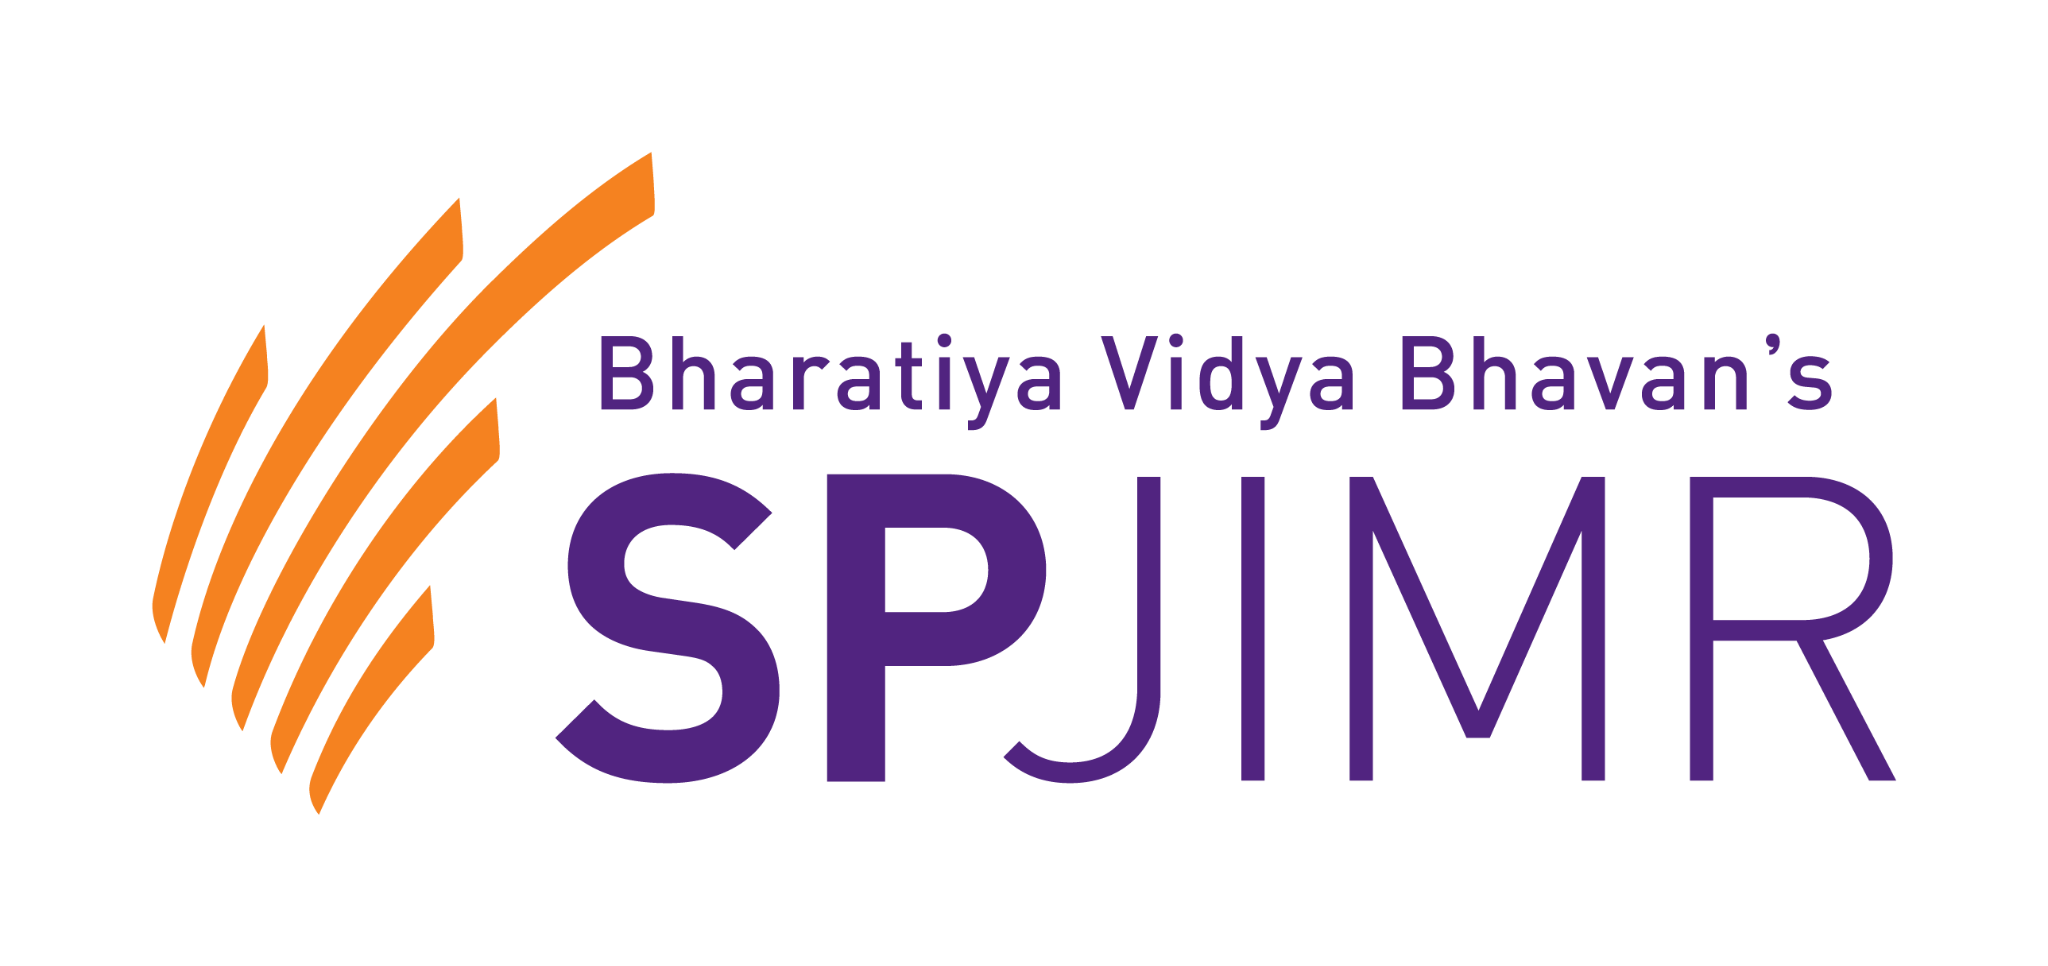 SPJIMR's Autumn Internship: Students receive 340 offers with a record average stipend of Rs 3.15 Lakh